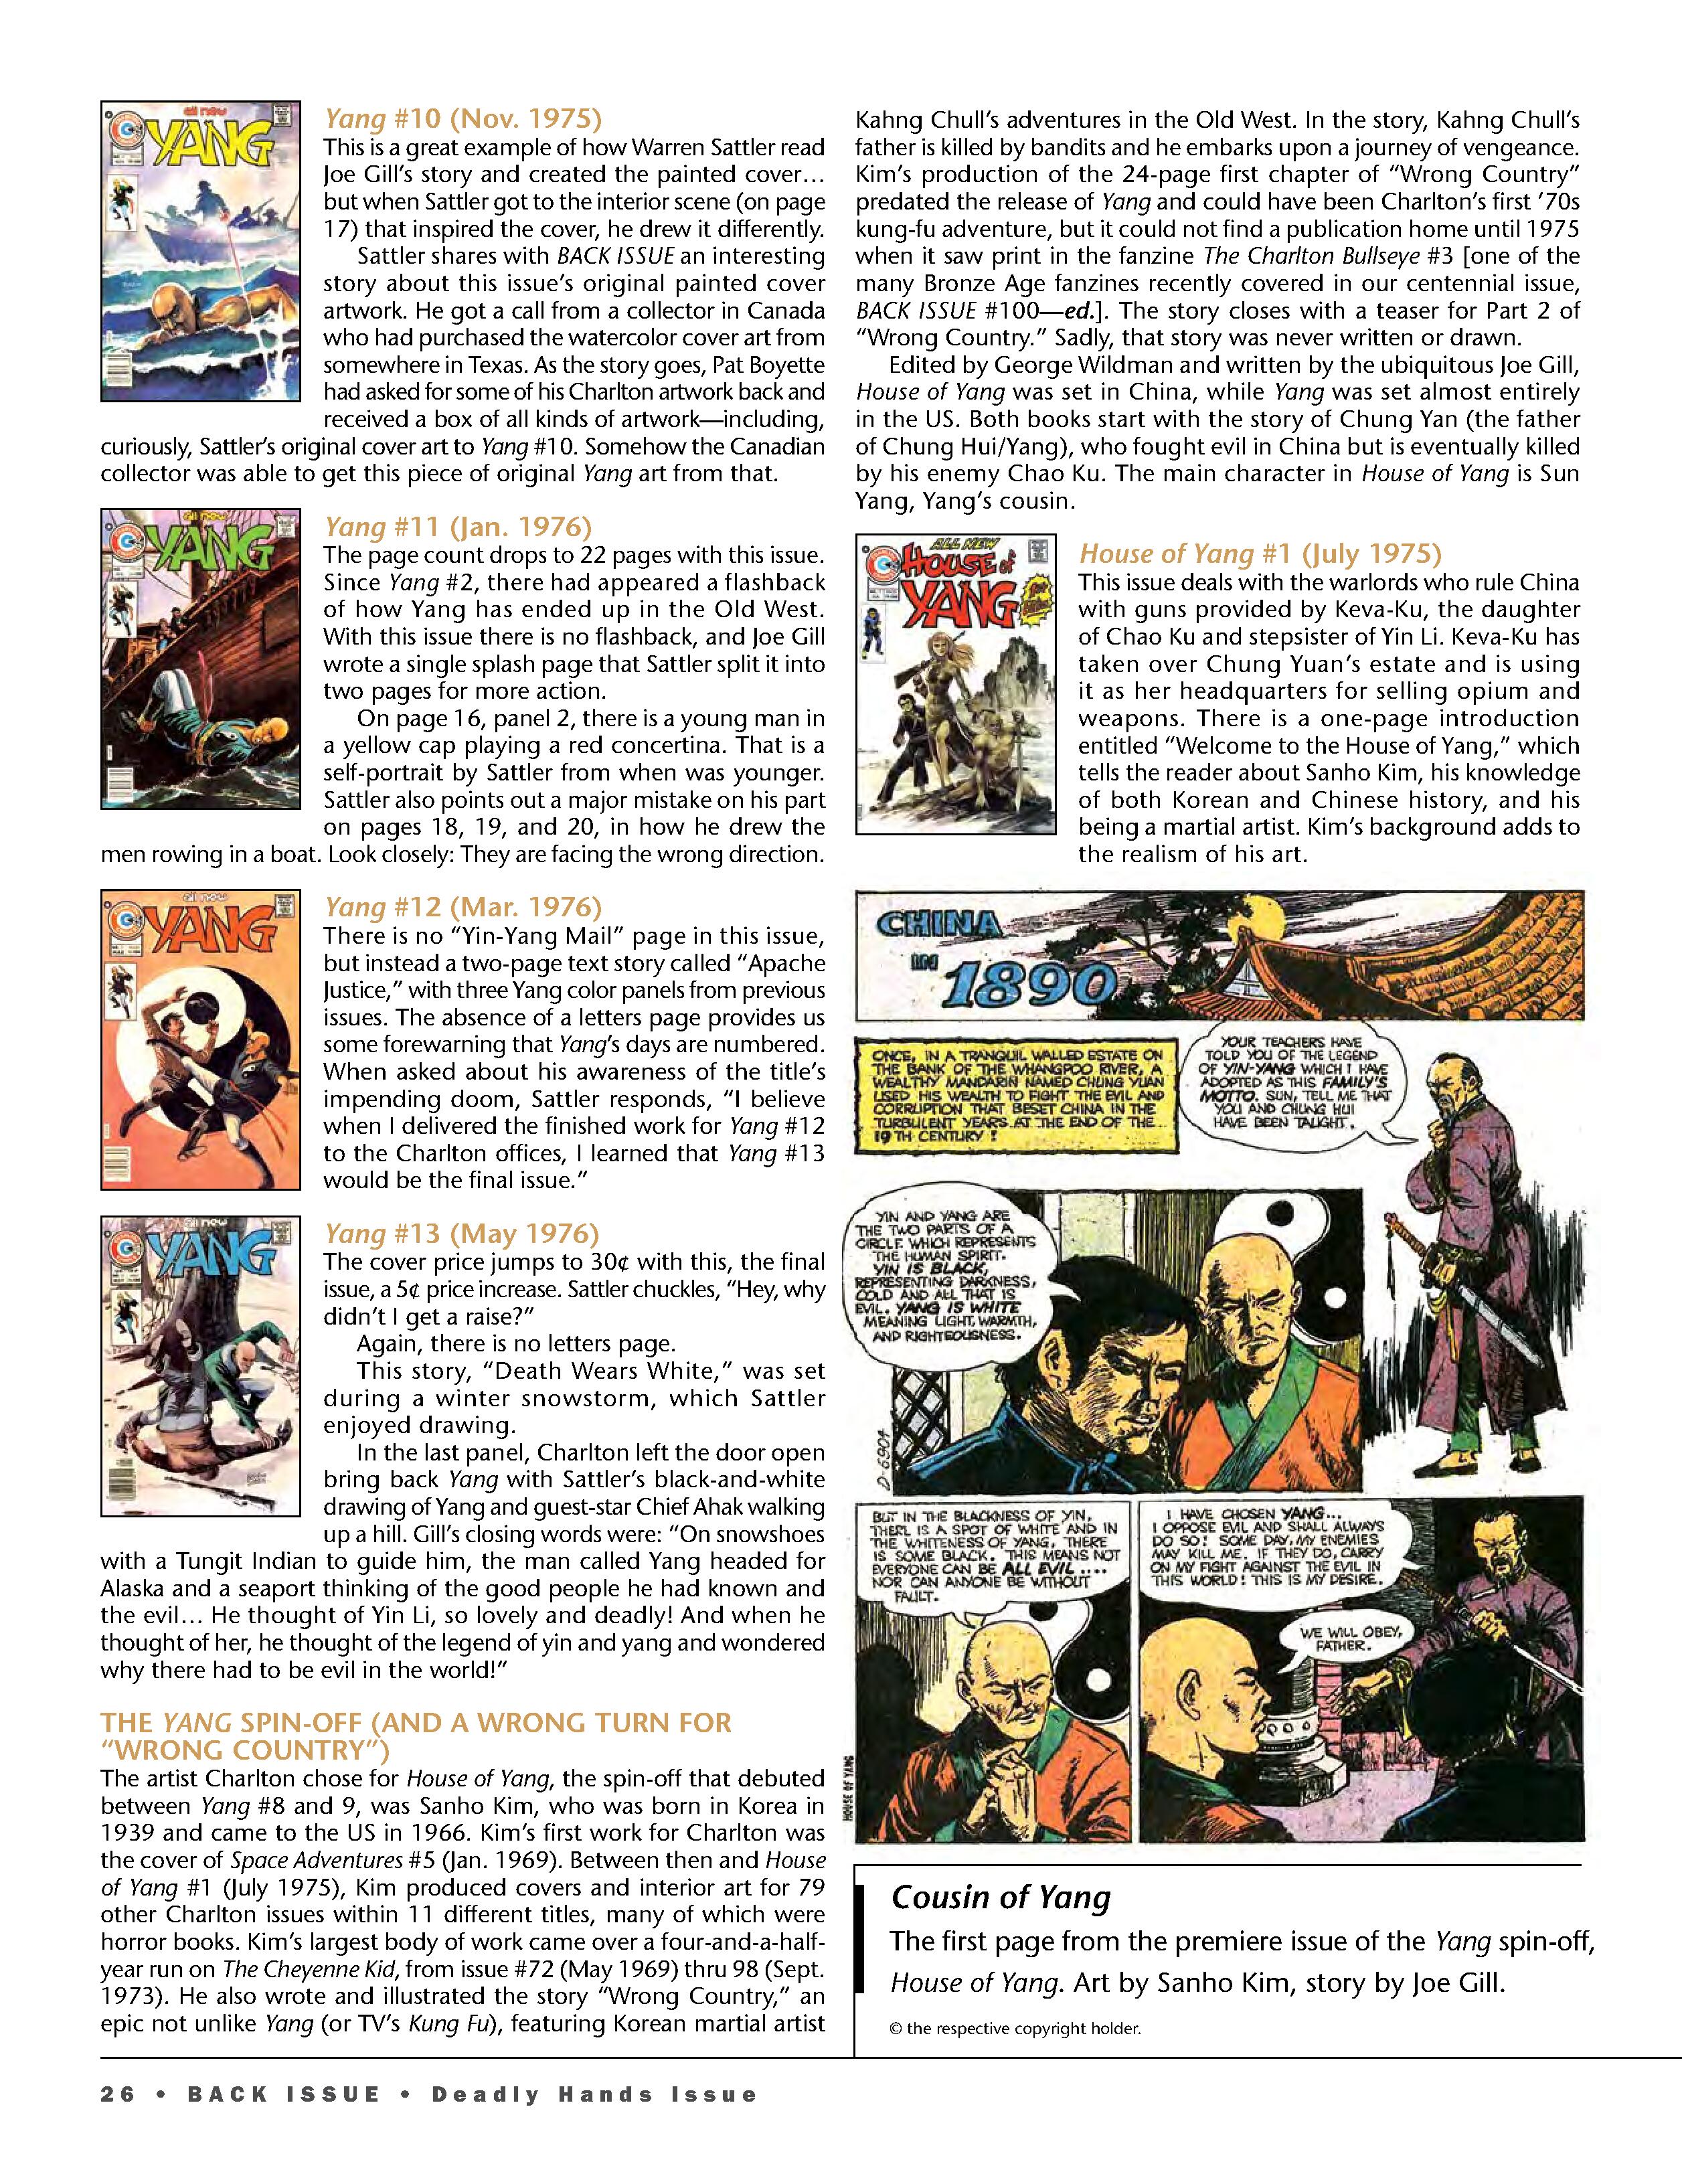 Read online Back Issue comic -  Issue #105 - 28